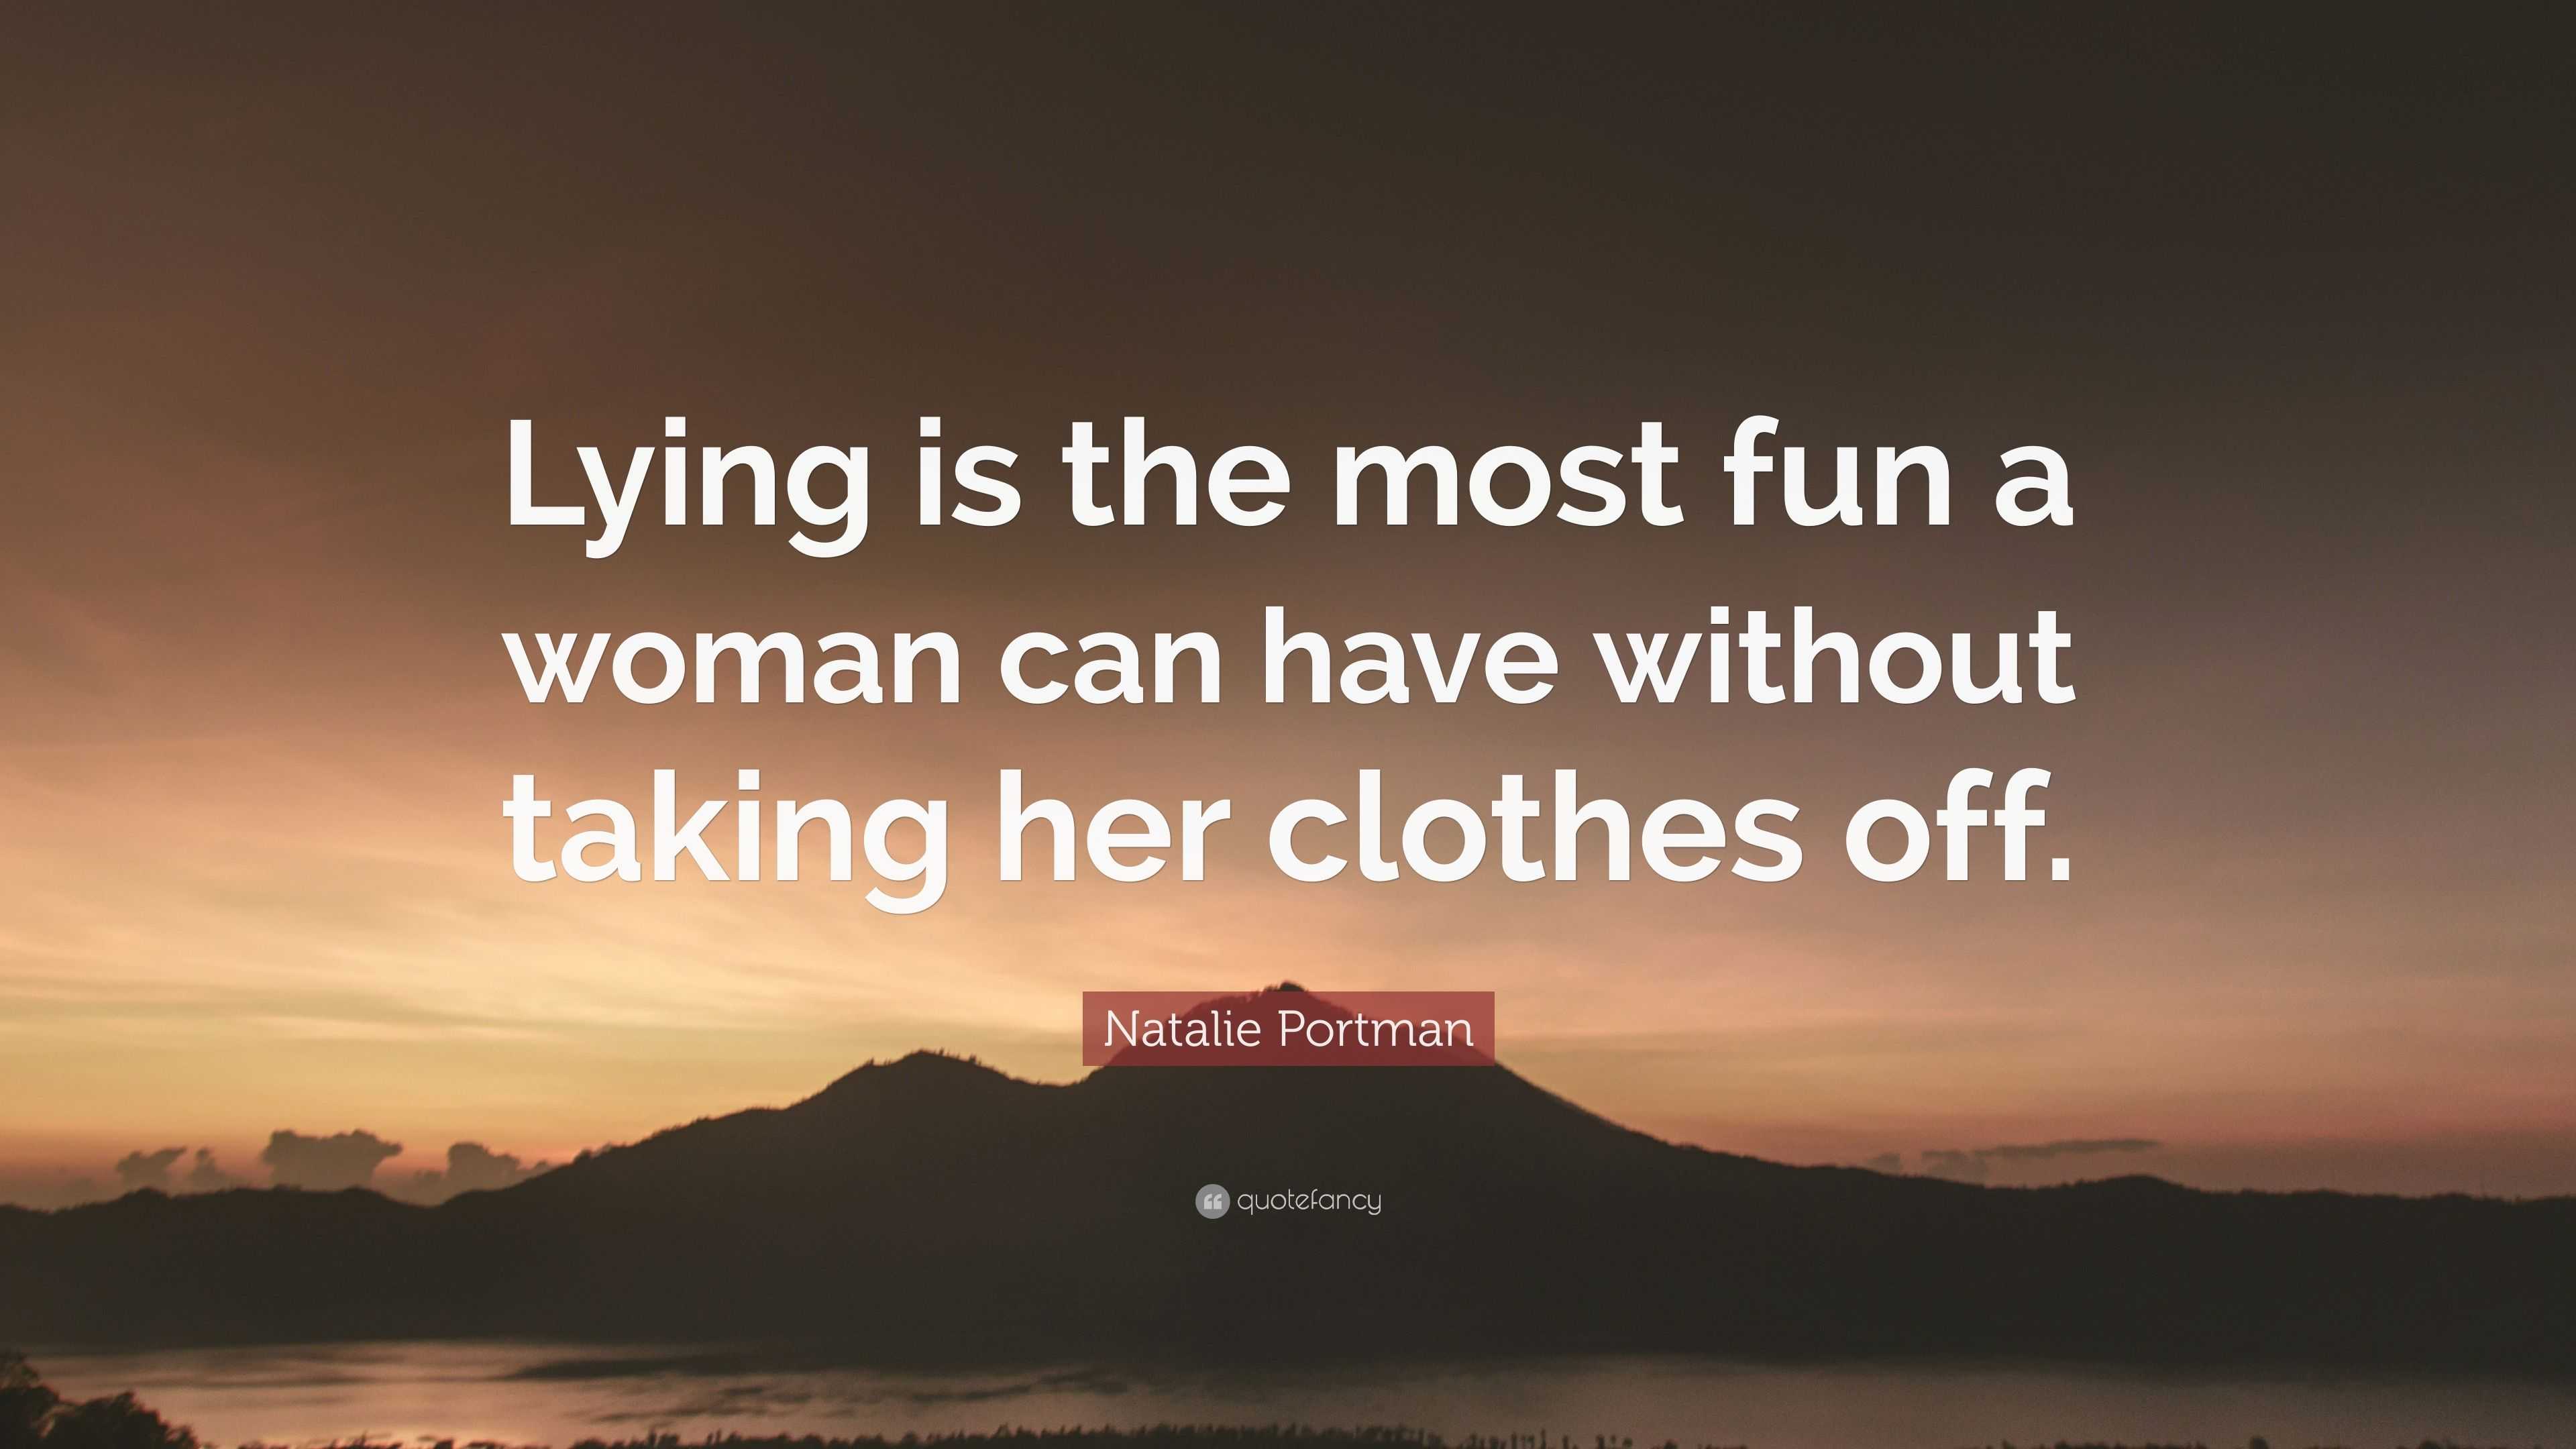 Natalie Portman Quote: “Lying is the most fun a woman can have without ...